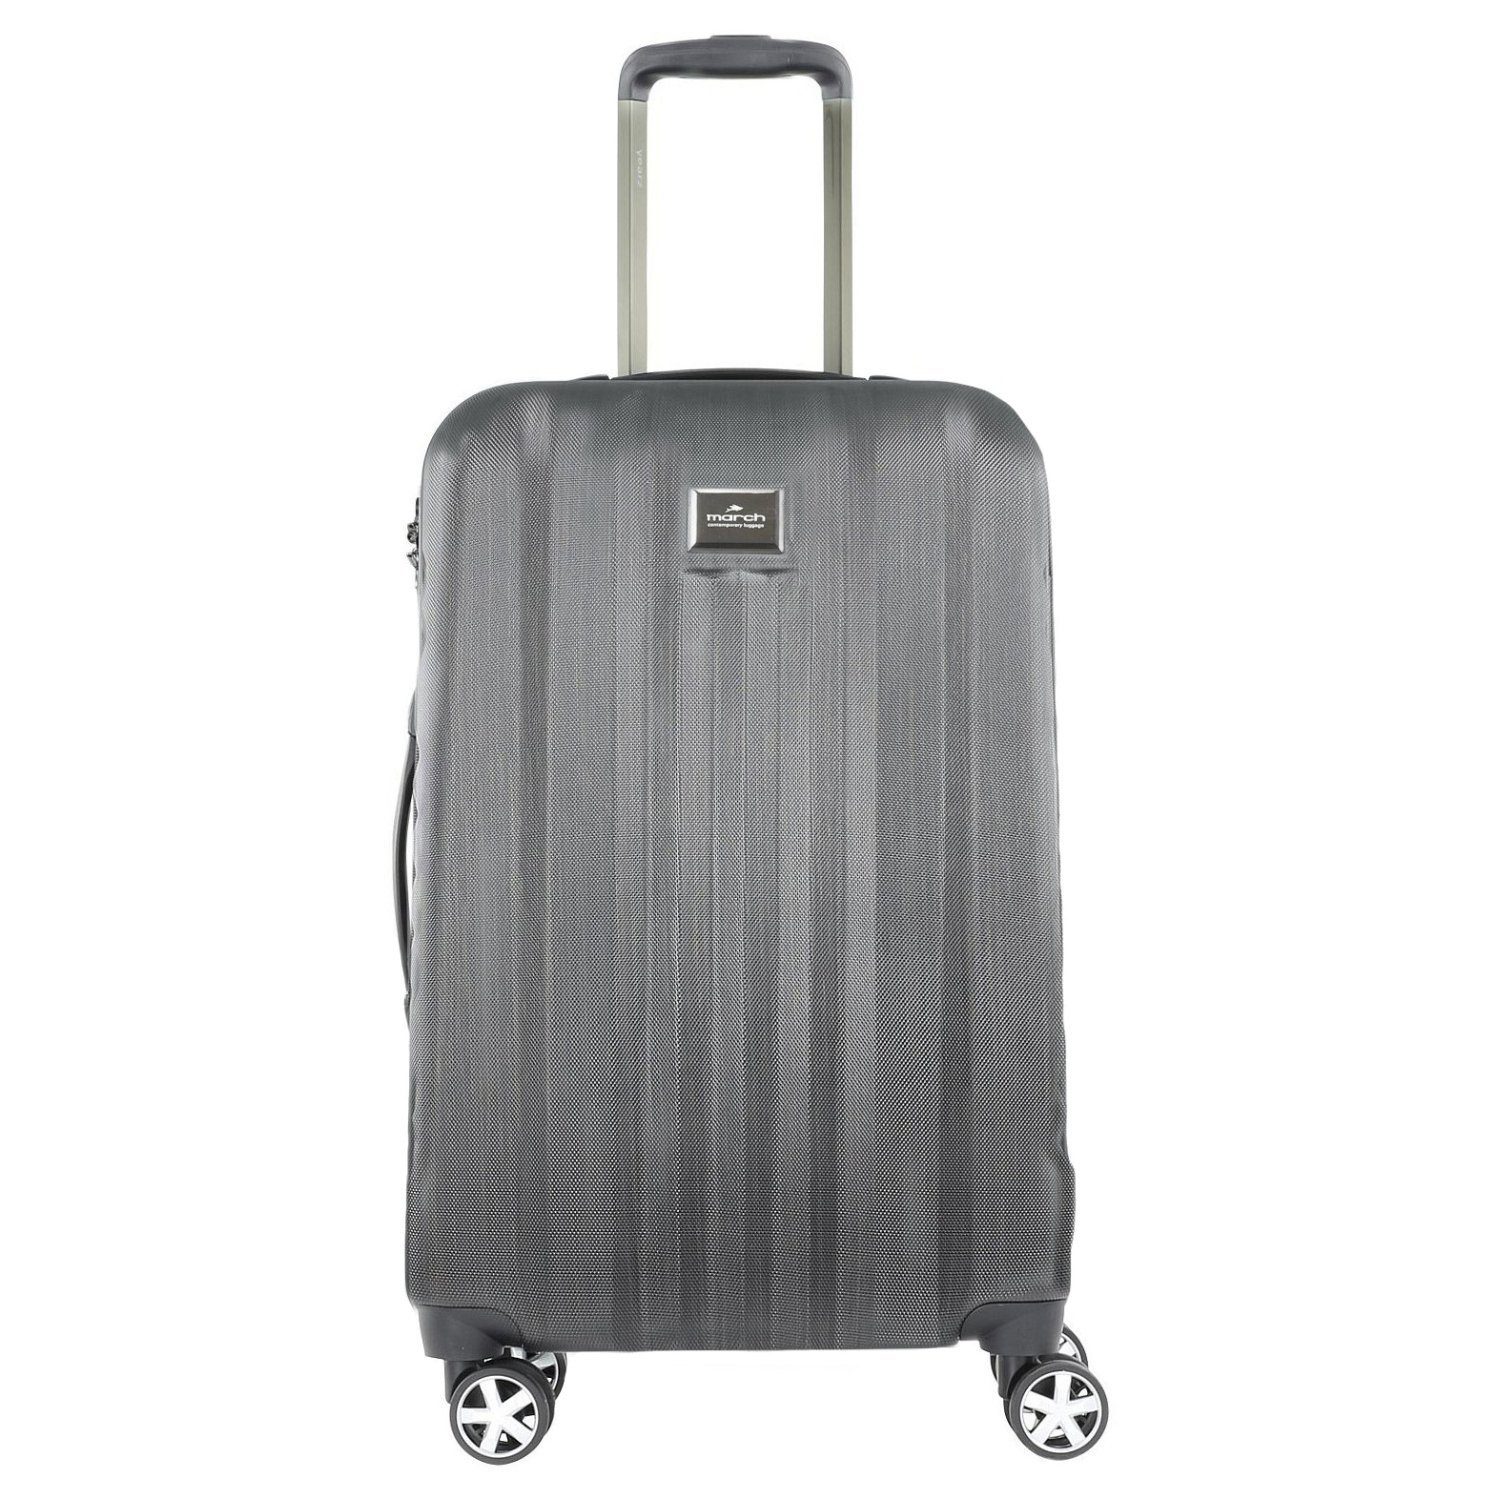 March15 Trading Trolley Fly brushed - 4-Rollen-Trolley M 65 cm, 4 Rollen bronze brushed